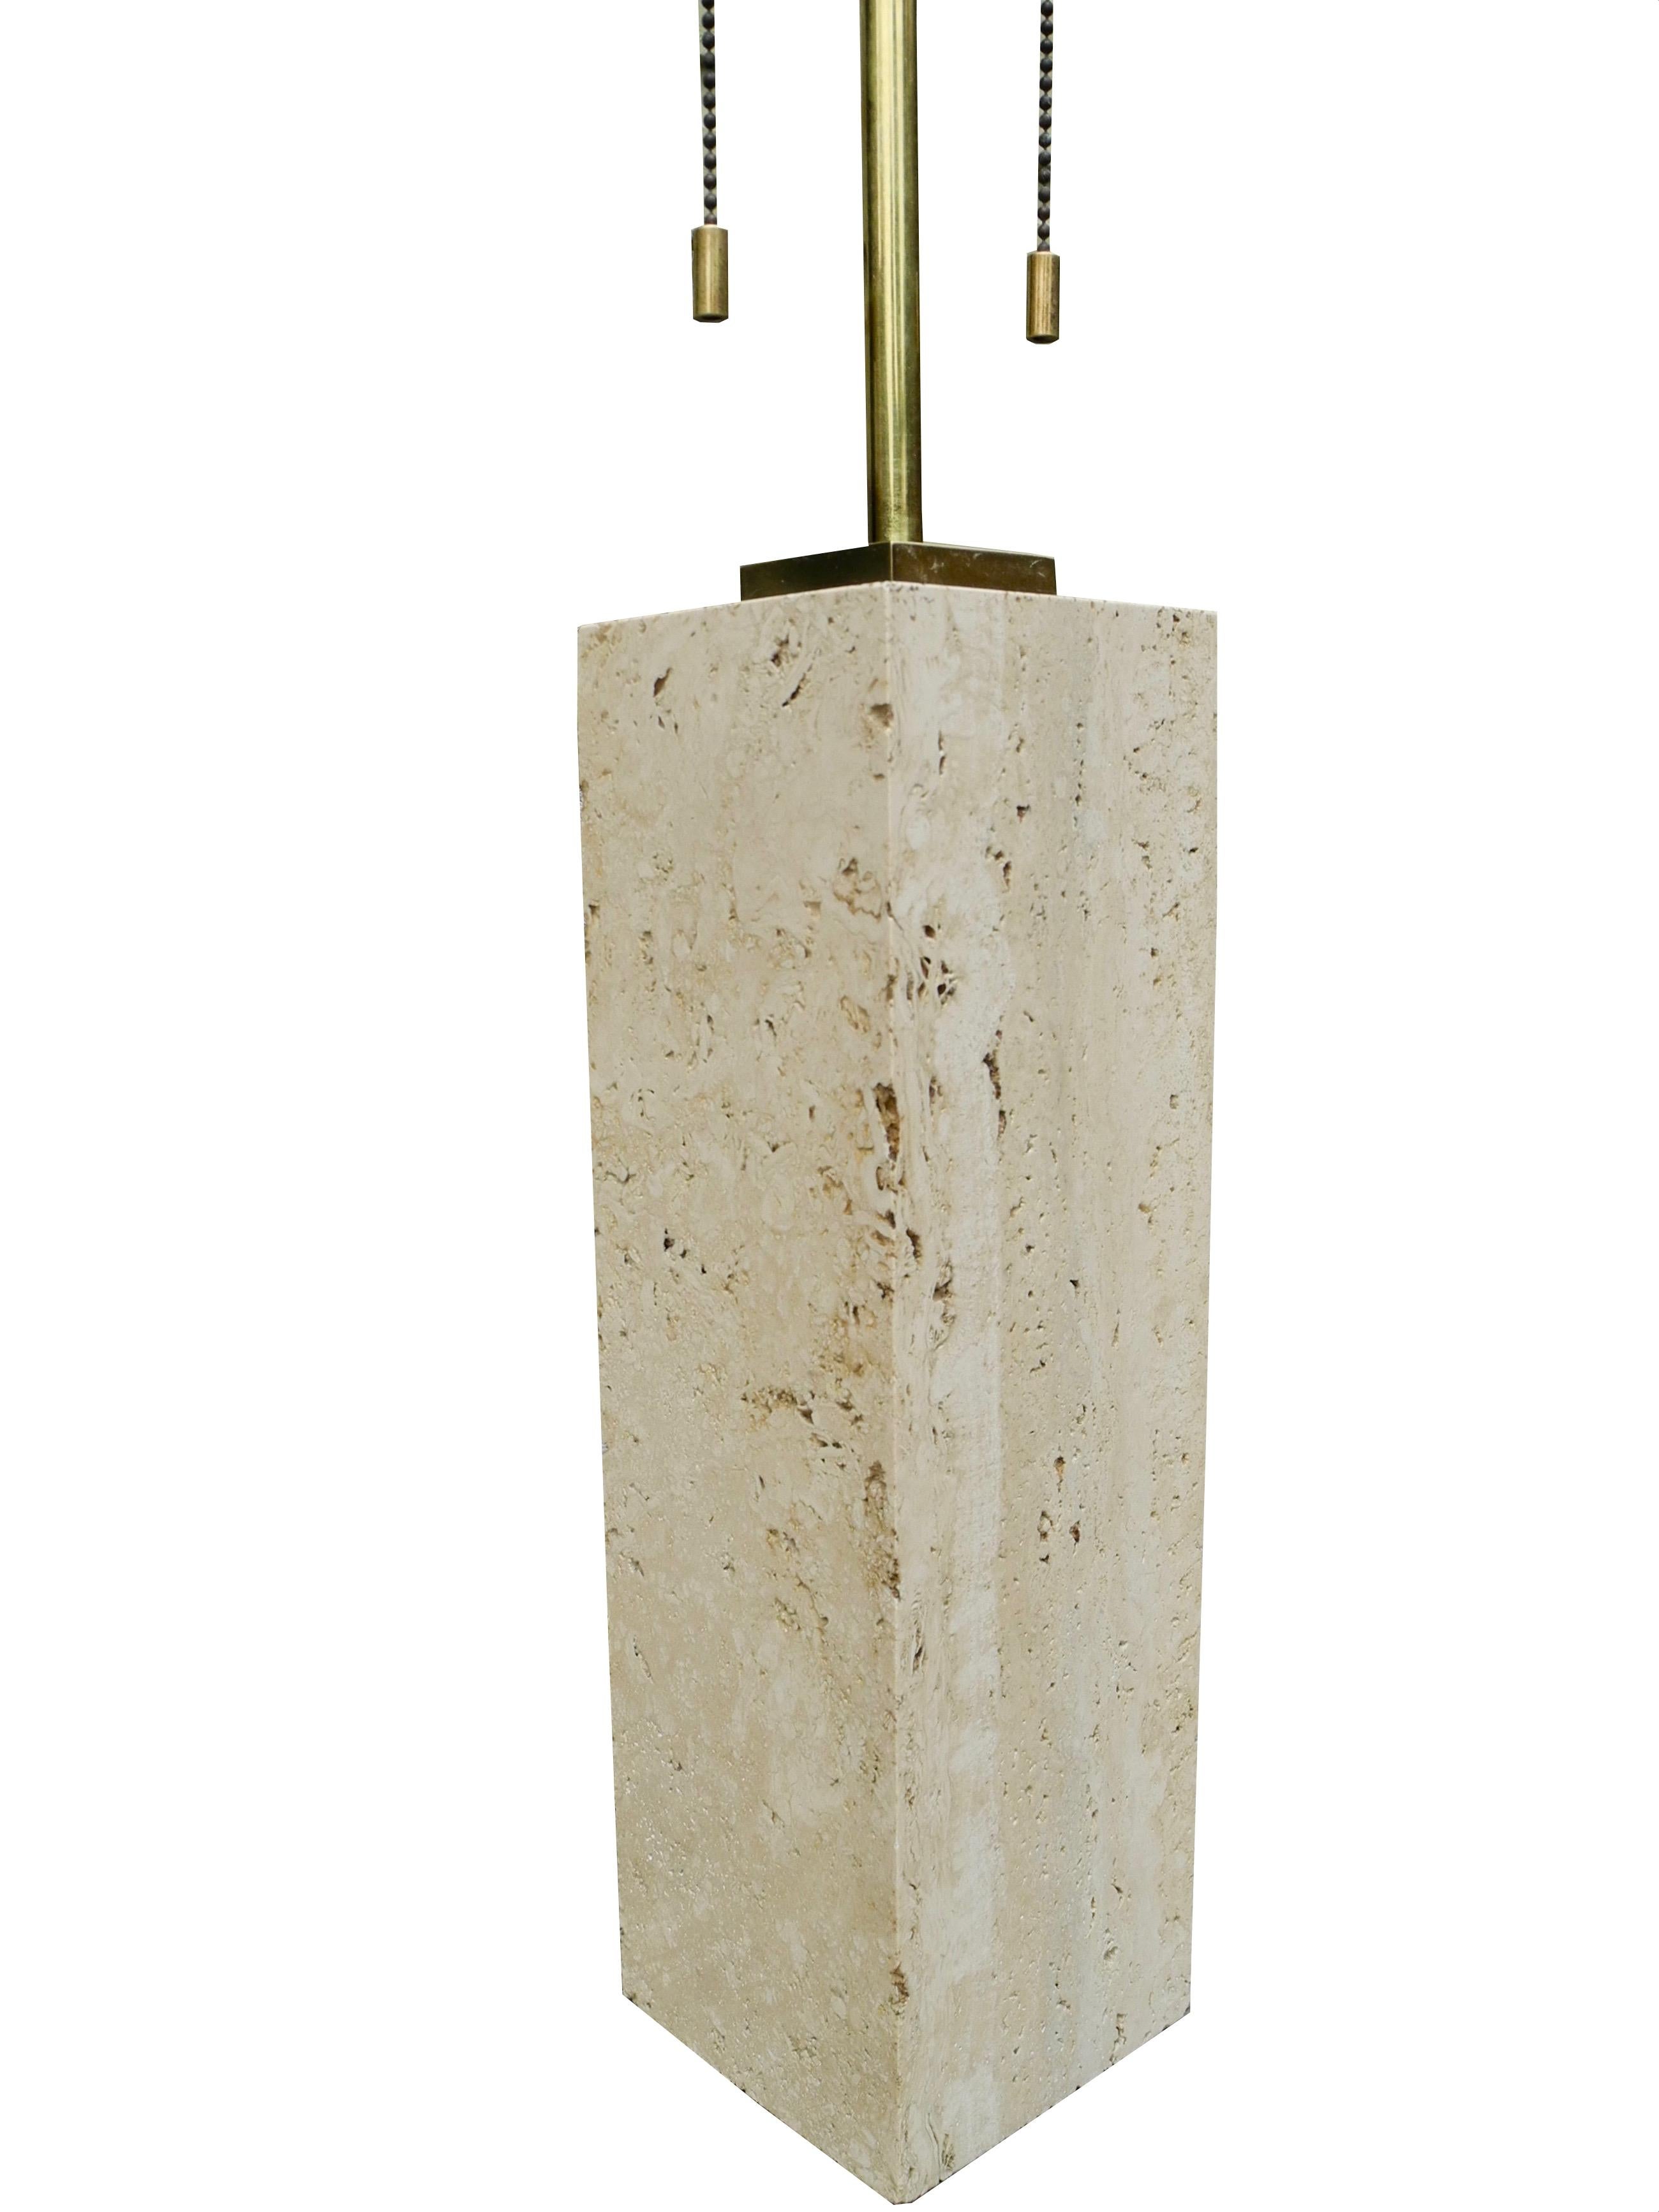 American Mid-Century Modern Travertine and Brass Lamp by TH Robsjohn-Gibbings For Sale